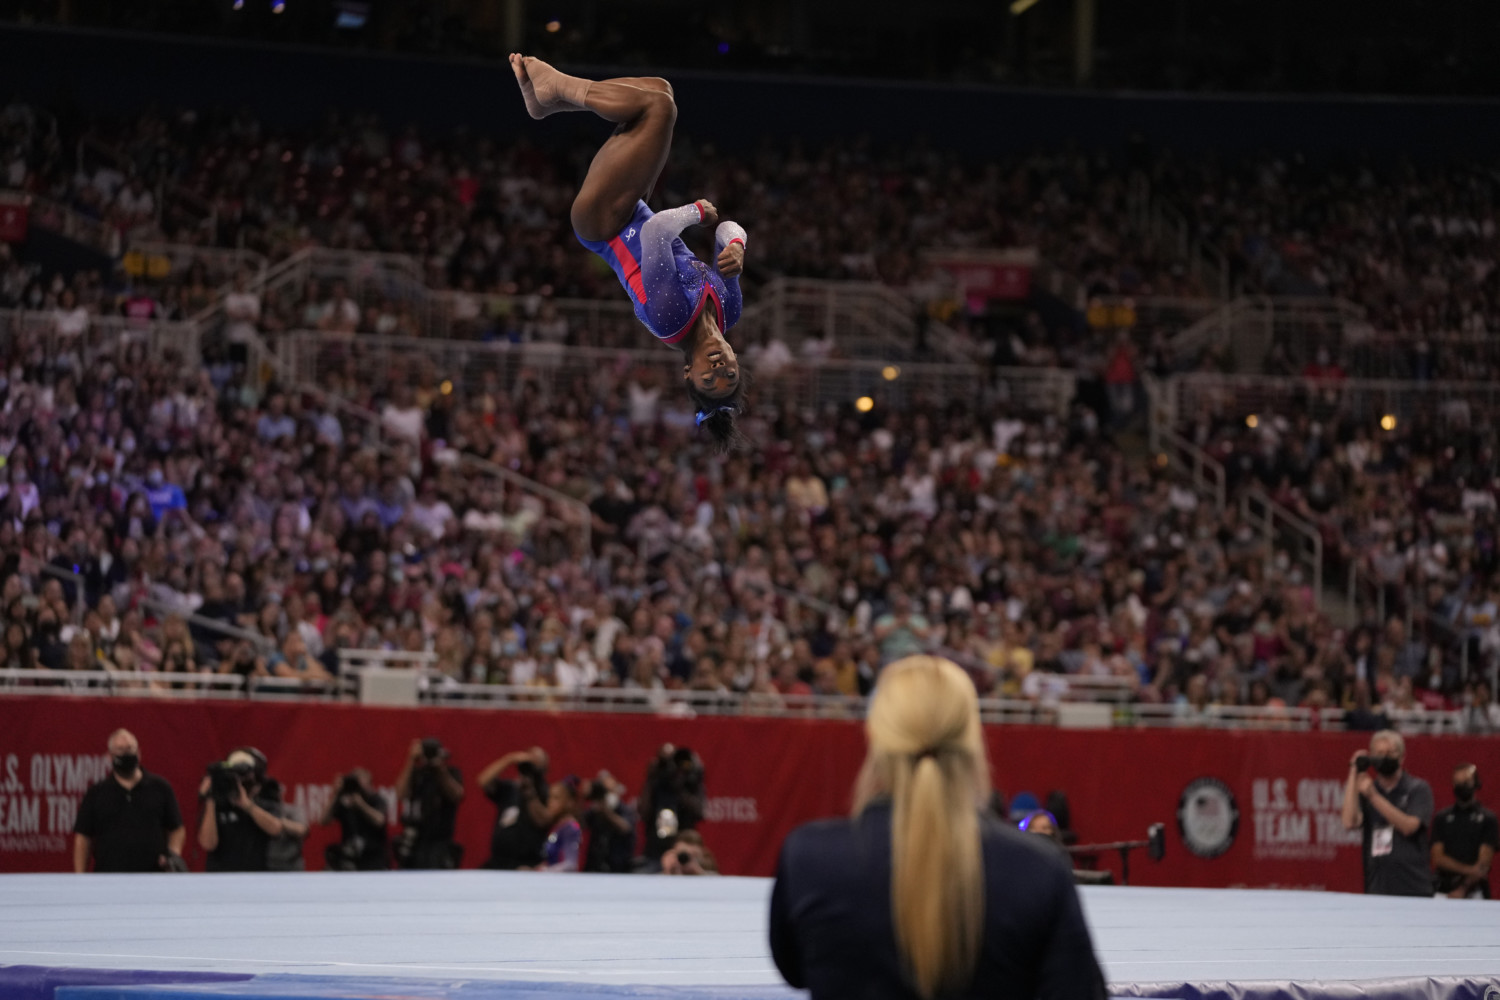 Simone Biles competes in the floor exercise during the women's U.S. Olympic Gymnastics Trials Friday, June 25, 2021, in St. Louis. (AP Photo/Jeff Roberson)